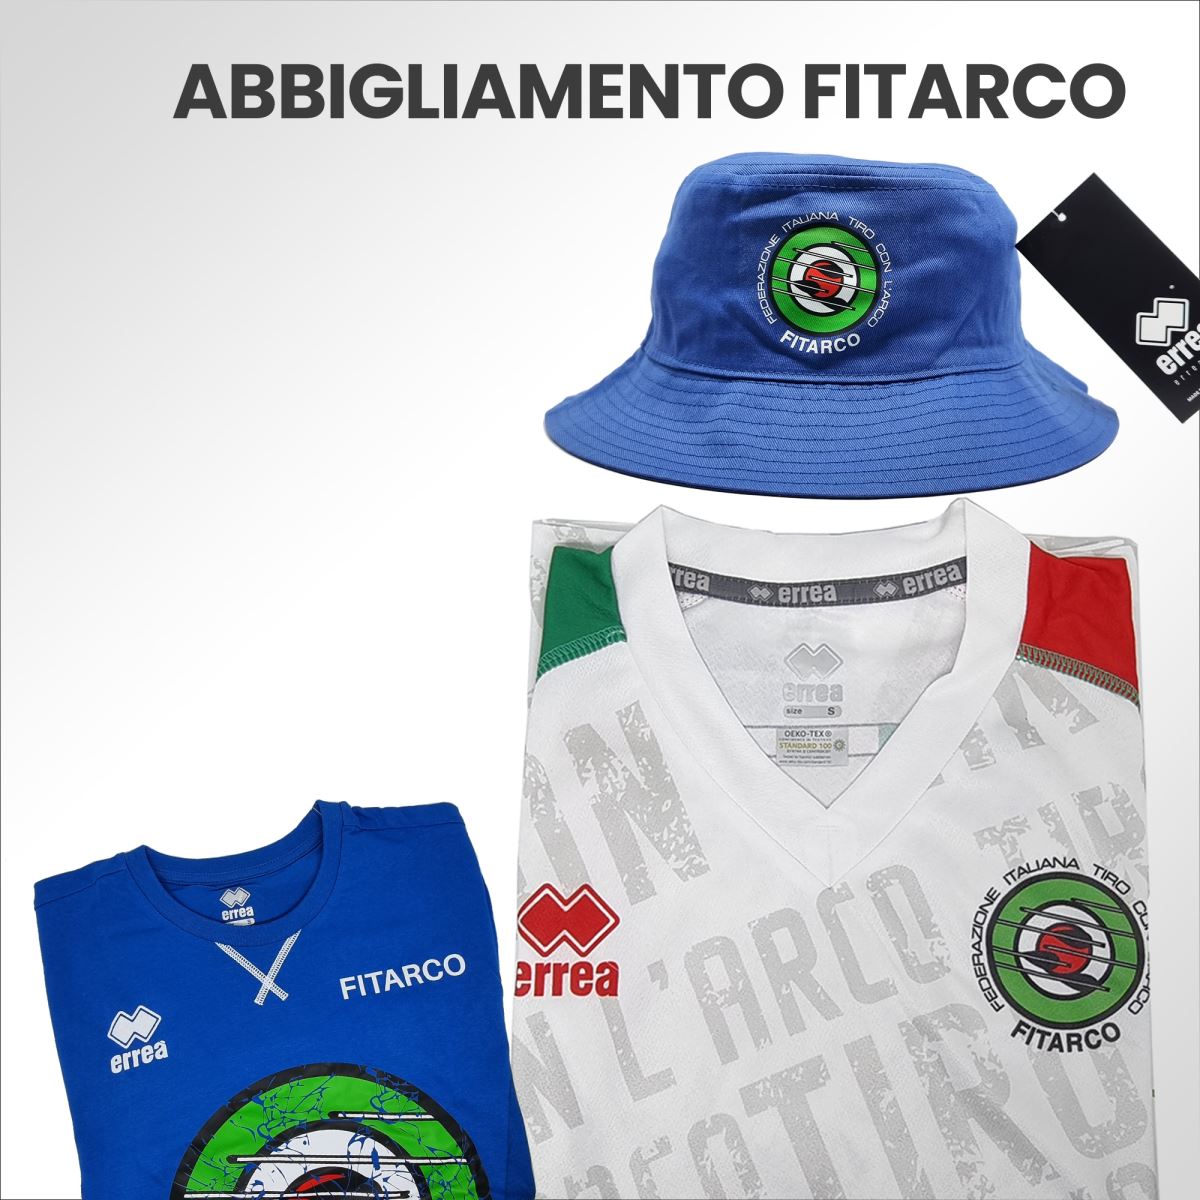 New Fitarco Apparel